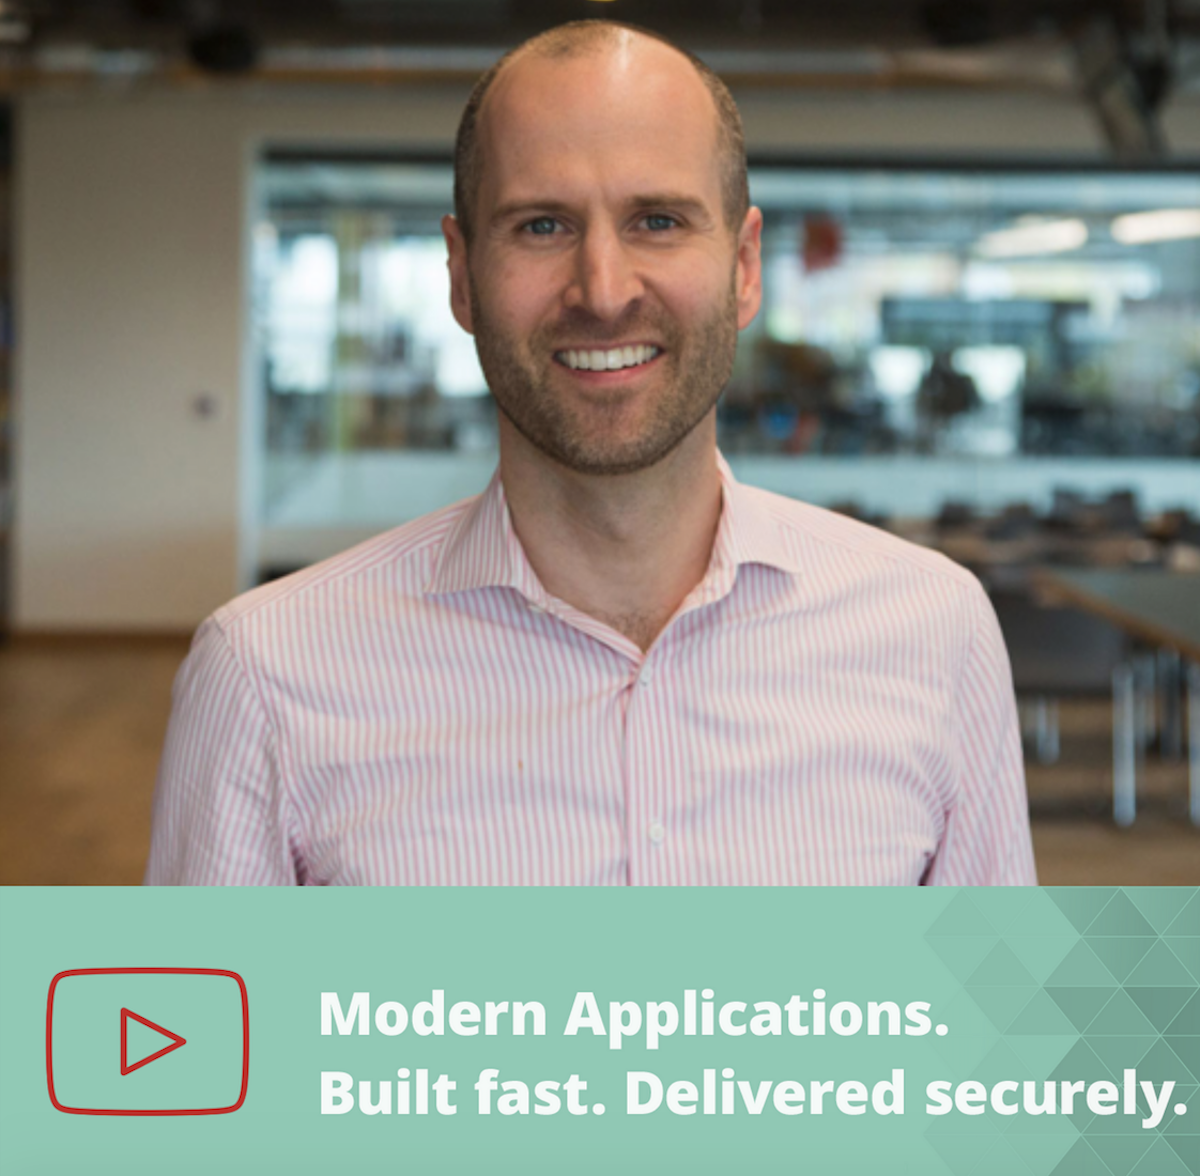 WATCH — Stackery's CEO Reviews Our New Secure Delivery Capabilities